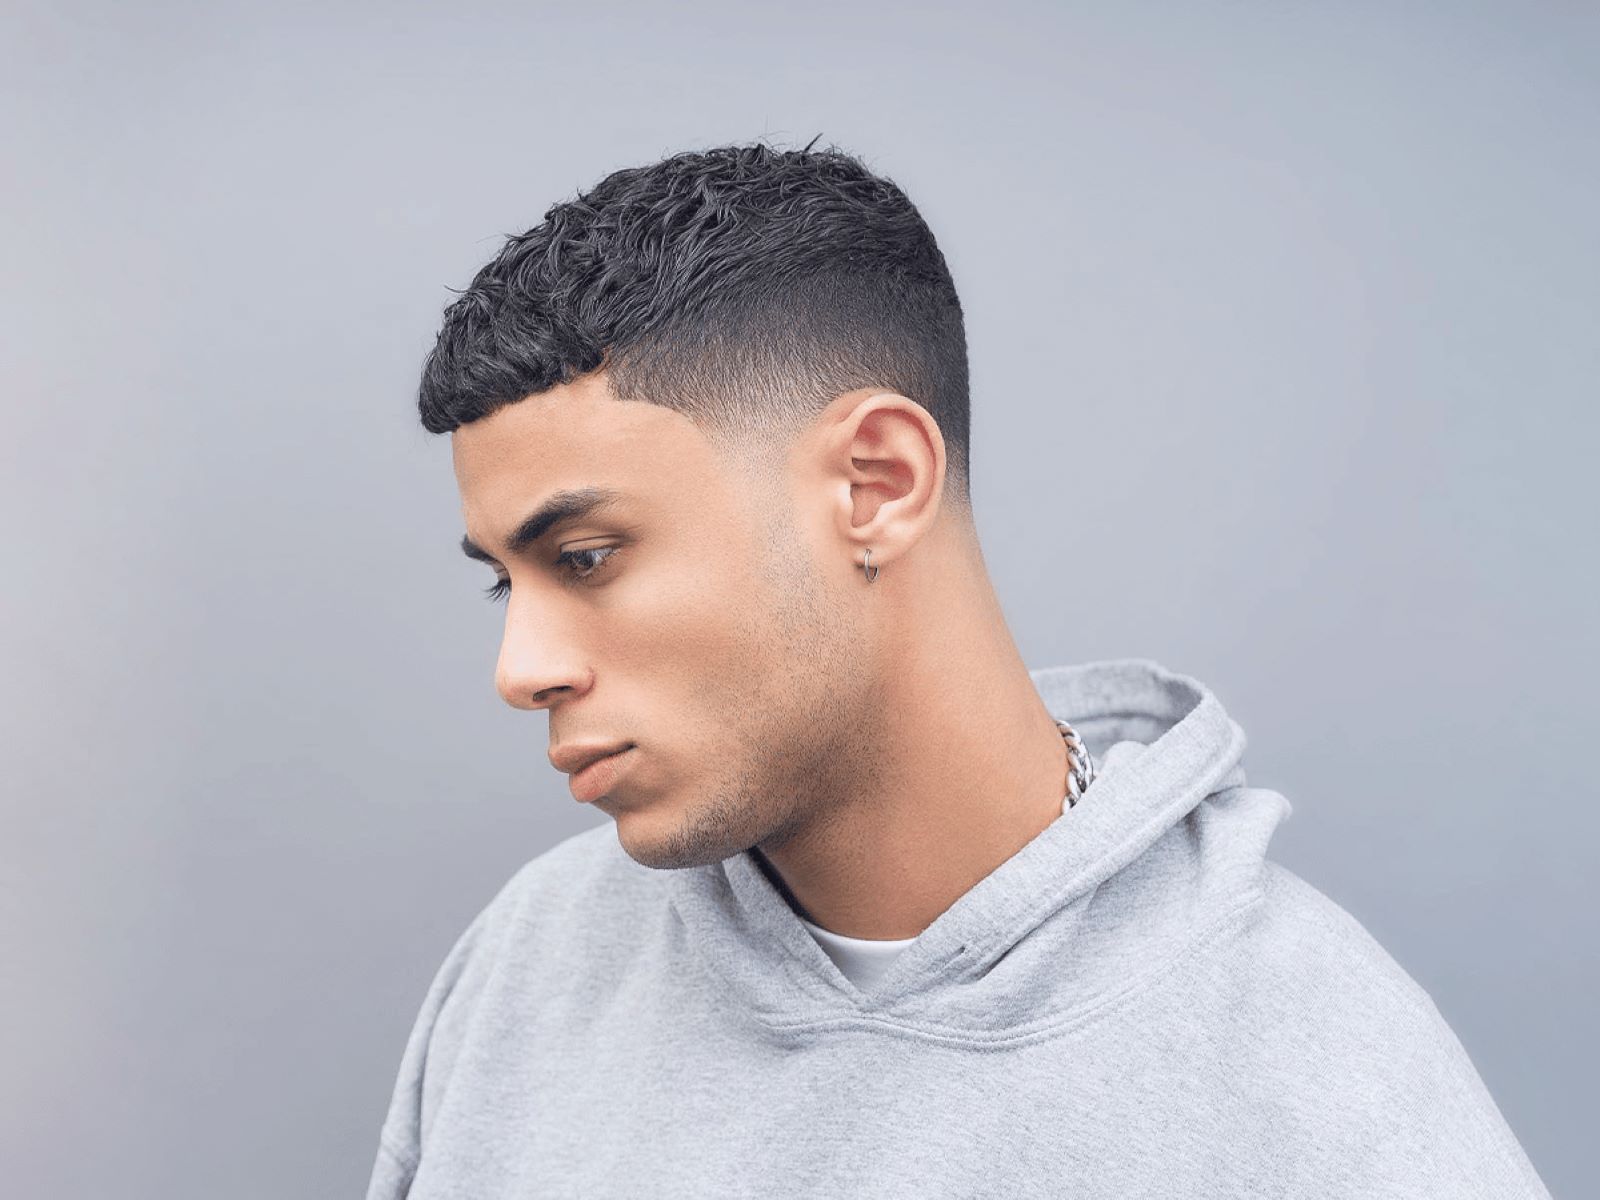 The Ultimate Hair Transformation: Taper Fade Vs. Letting It Grow Out